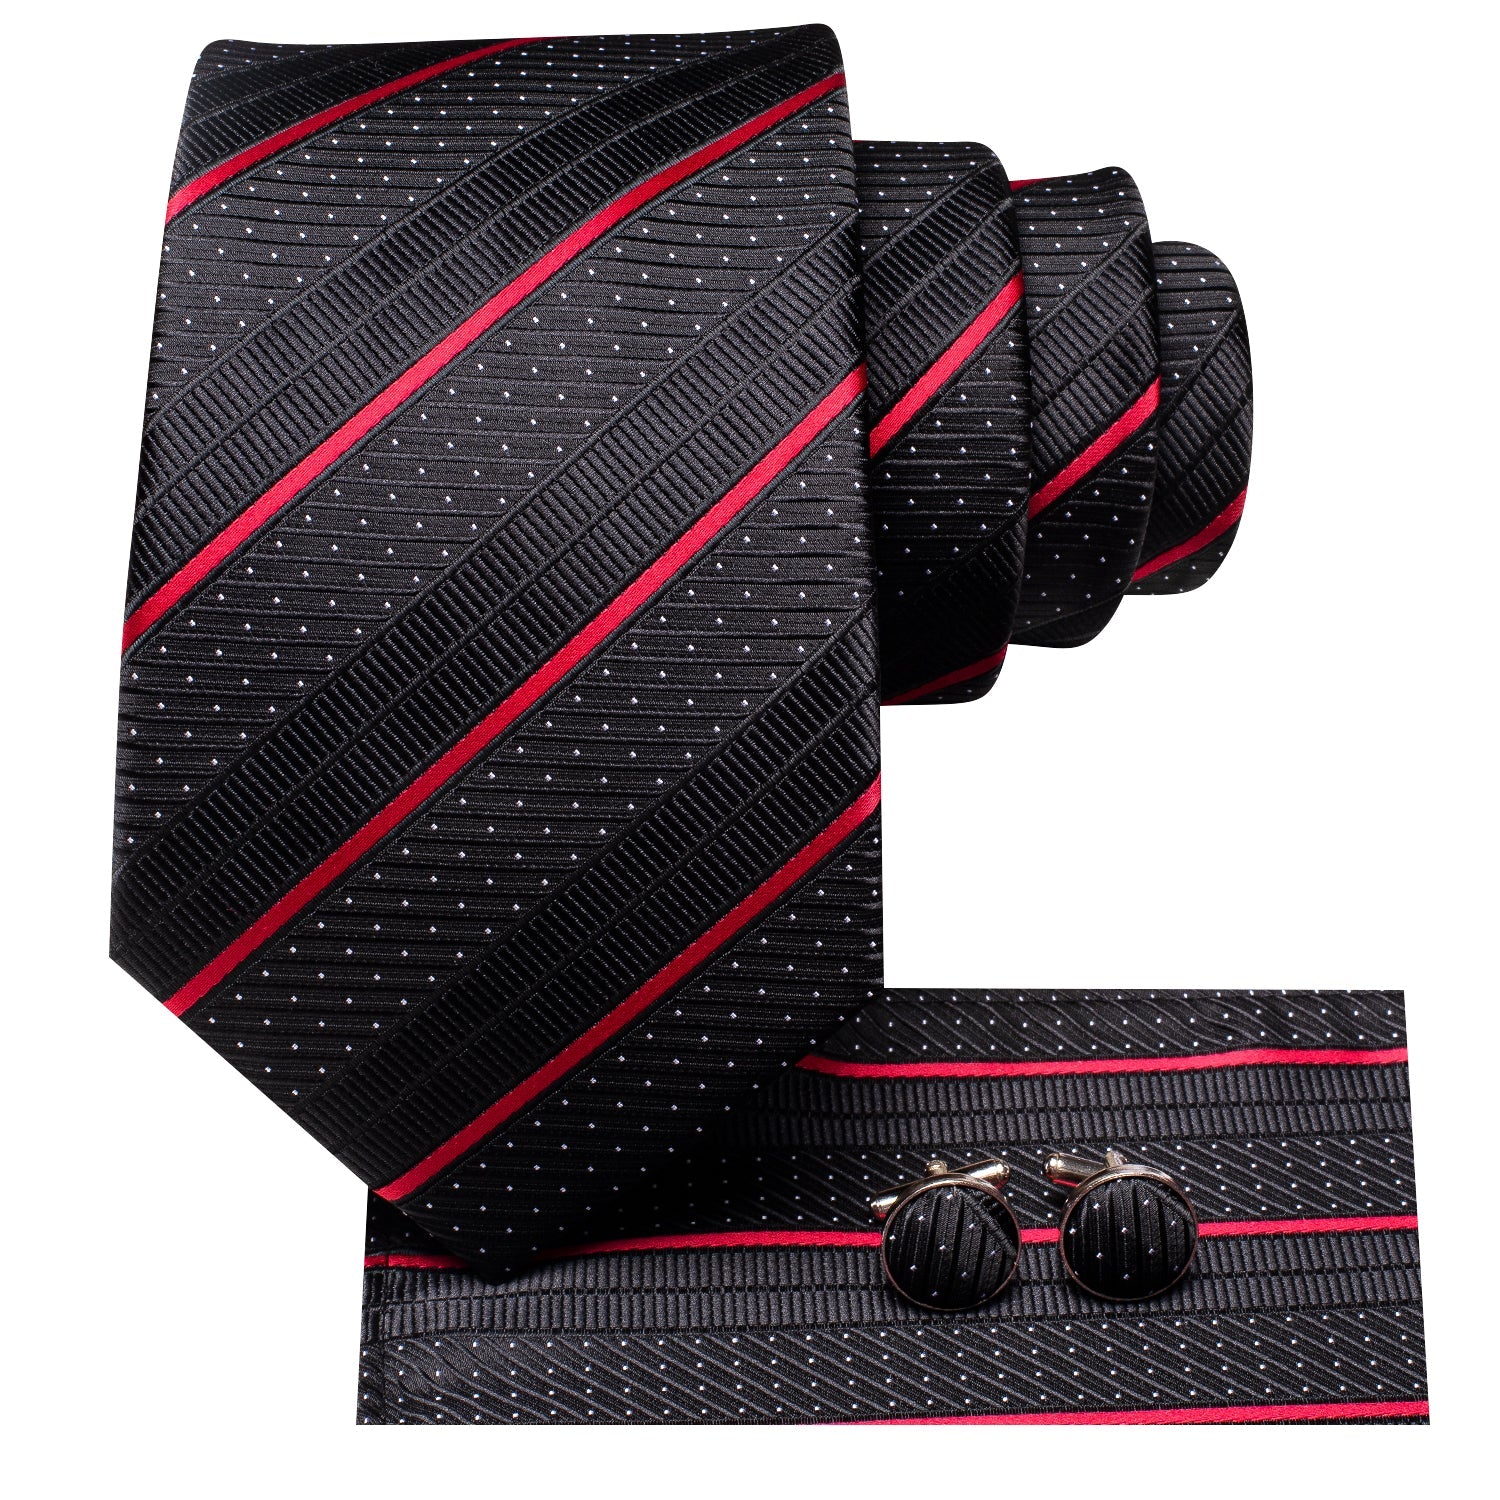 New Black Red Strip 70 Inches Extra Long Tie Pocket Square Cufflinks Set